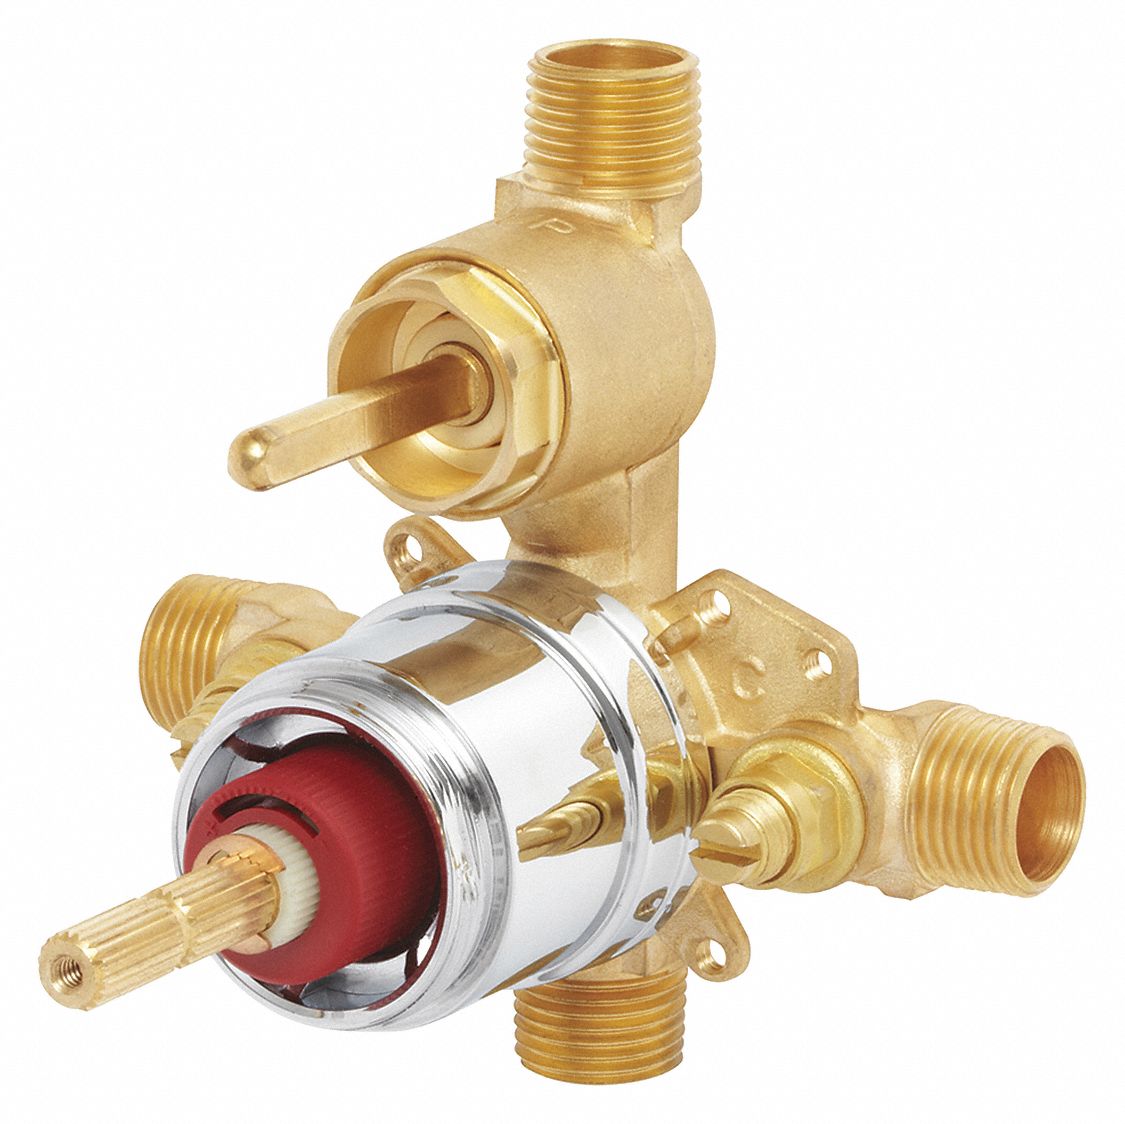 Diverter Valve Sweat: 1/4 in to 1/2 in, Brass, Poppet/Seat/Spring, 33° to 180°F